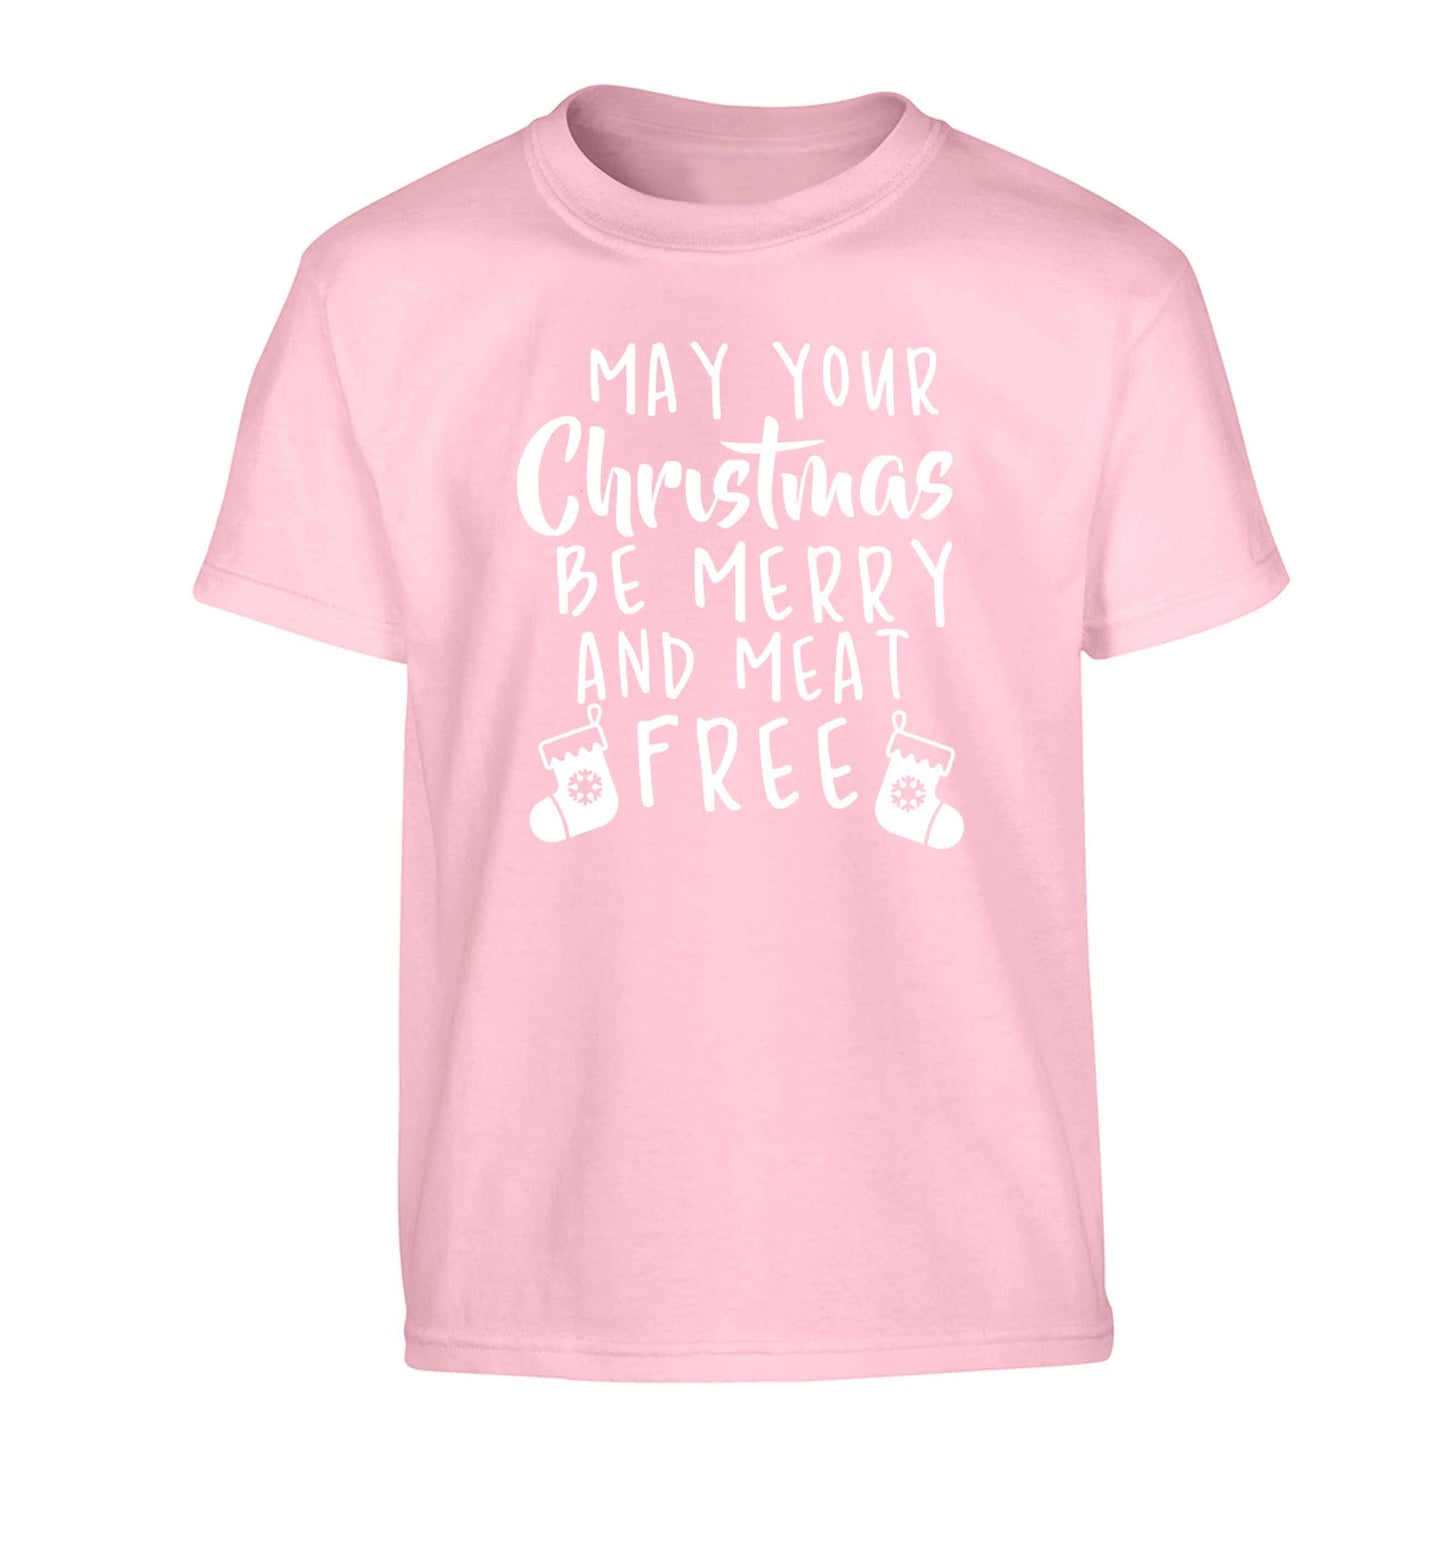 May your Christmas be merry and meat free Children's light pink Tshirt 12-13 Years